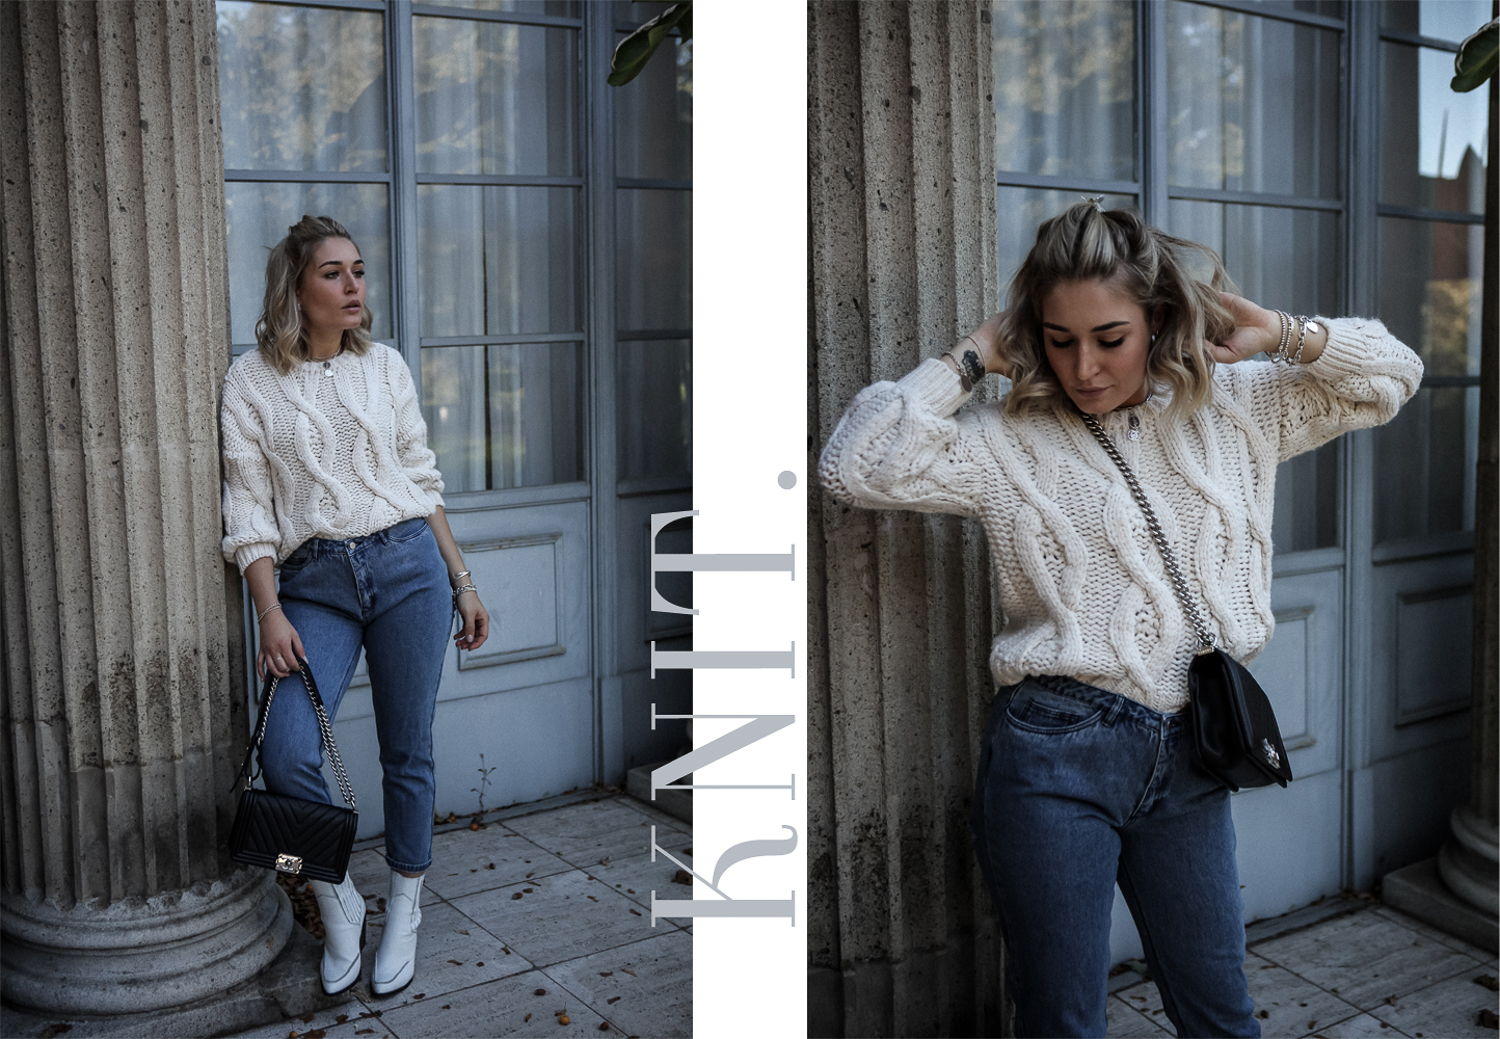 Lauralamode Strick Knit Knitwear Strickpullover Outit Ootd Mango Nakd Chanel Only Look Streetstyle Winter Berlin Fashionblogger Blogger Munich4